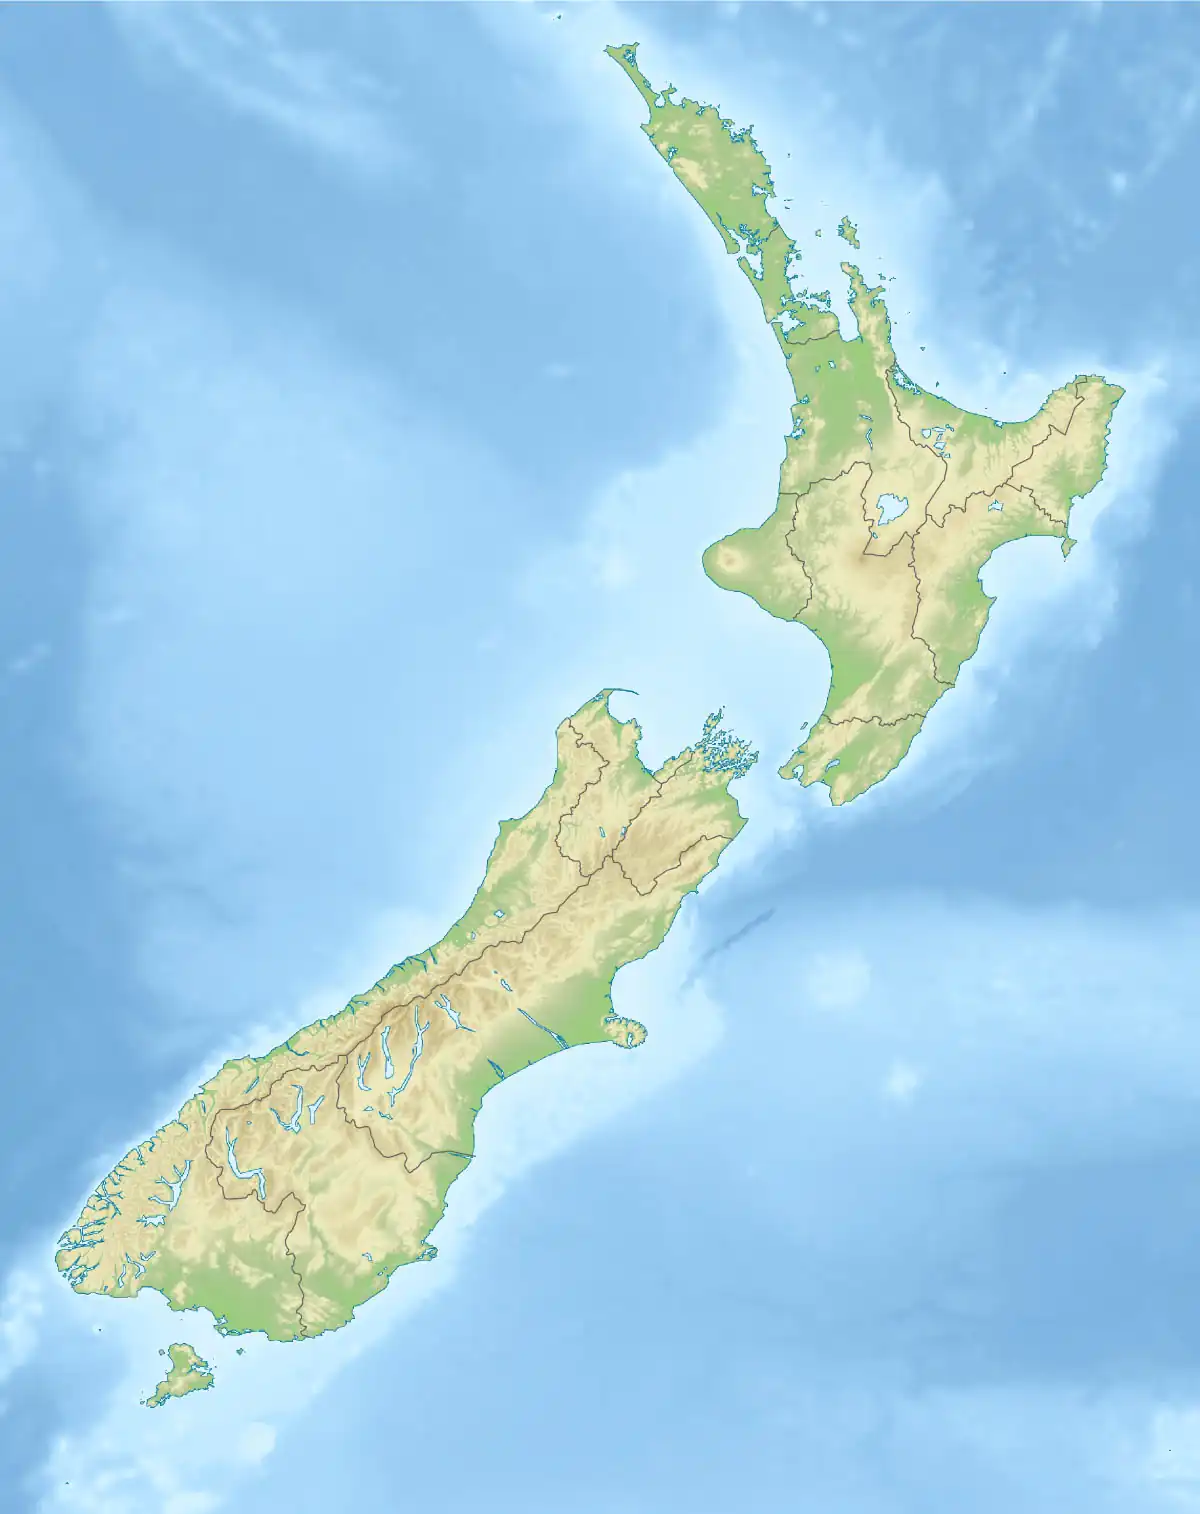 2011 Christchurch earthquake is located in New Zealand